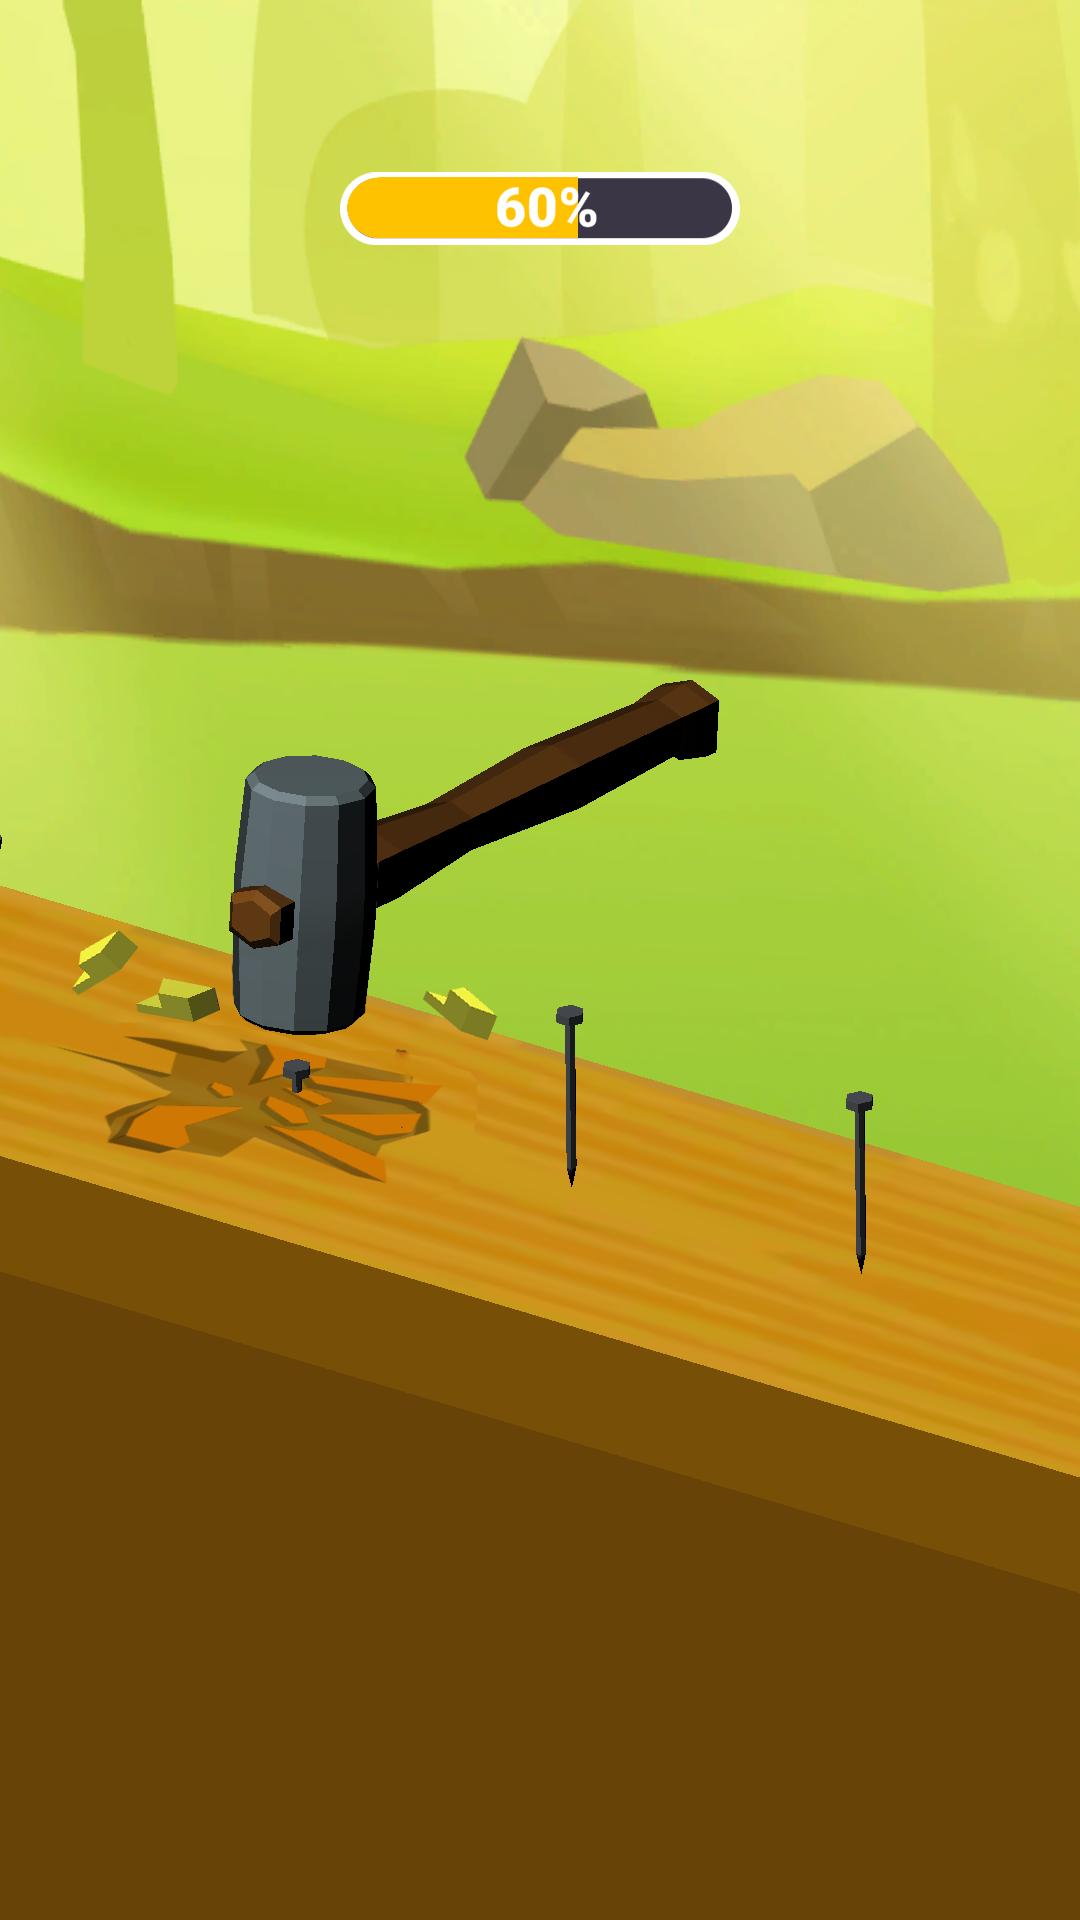 Cut the Wood Android. Wood Cutter animation. Wood Cutter gif. Mod Cut. Stories cutting